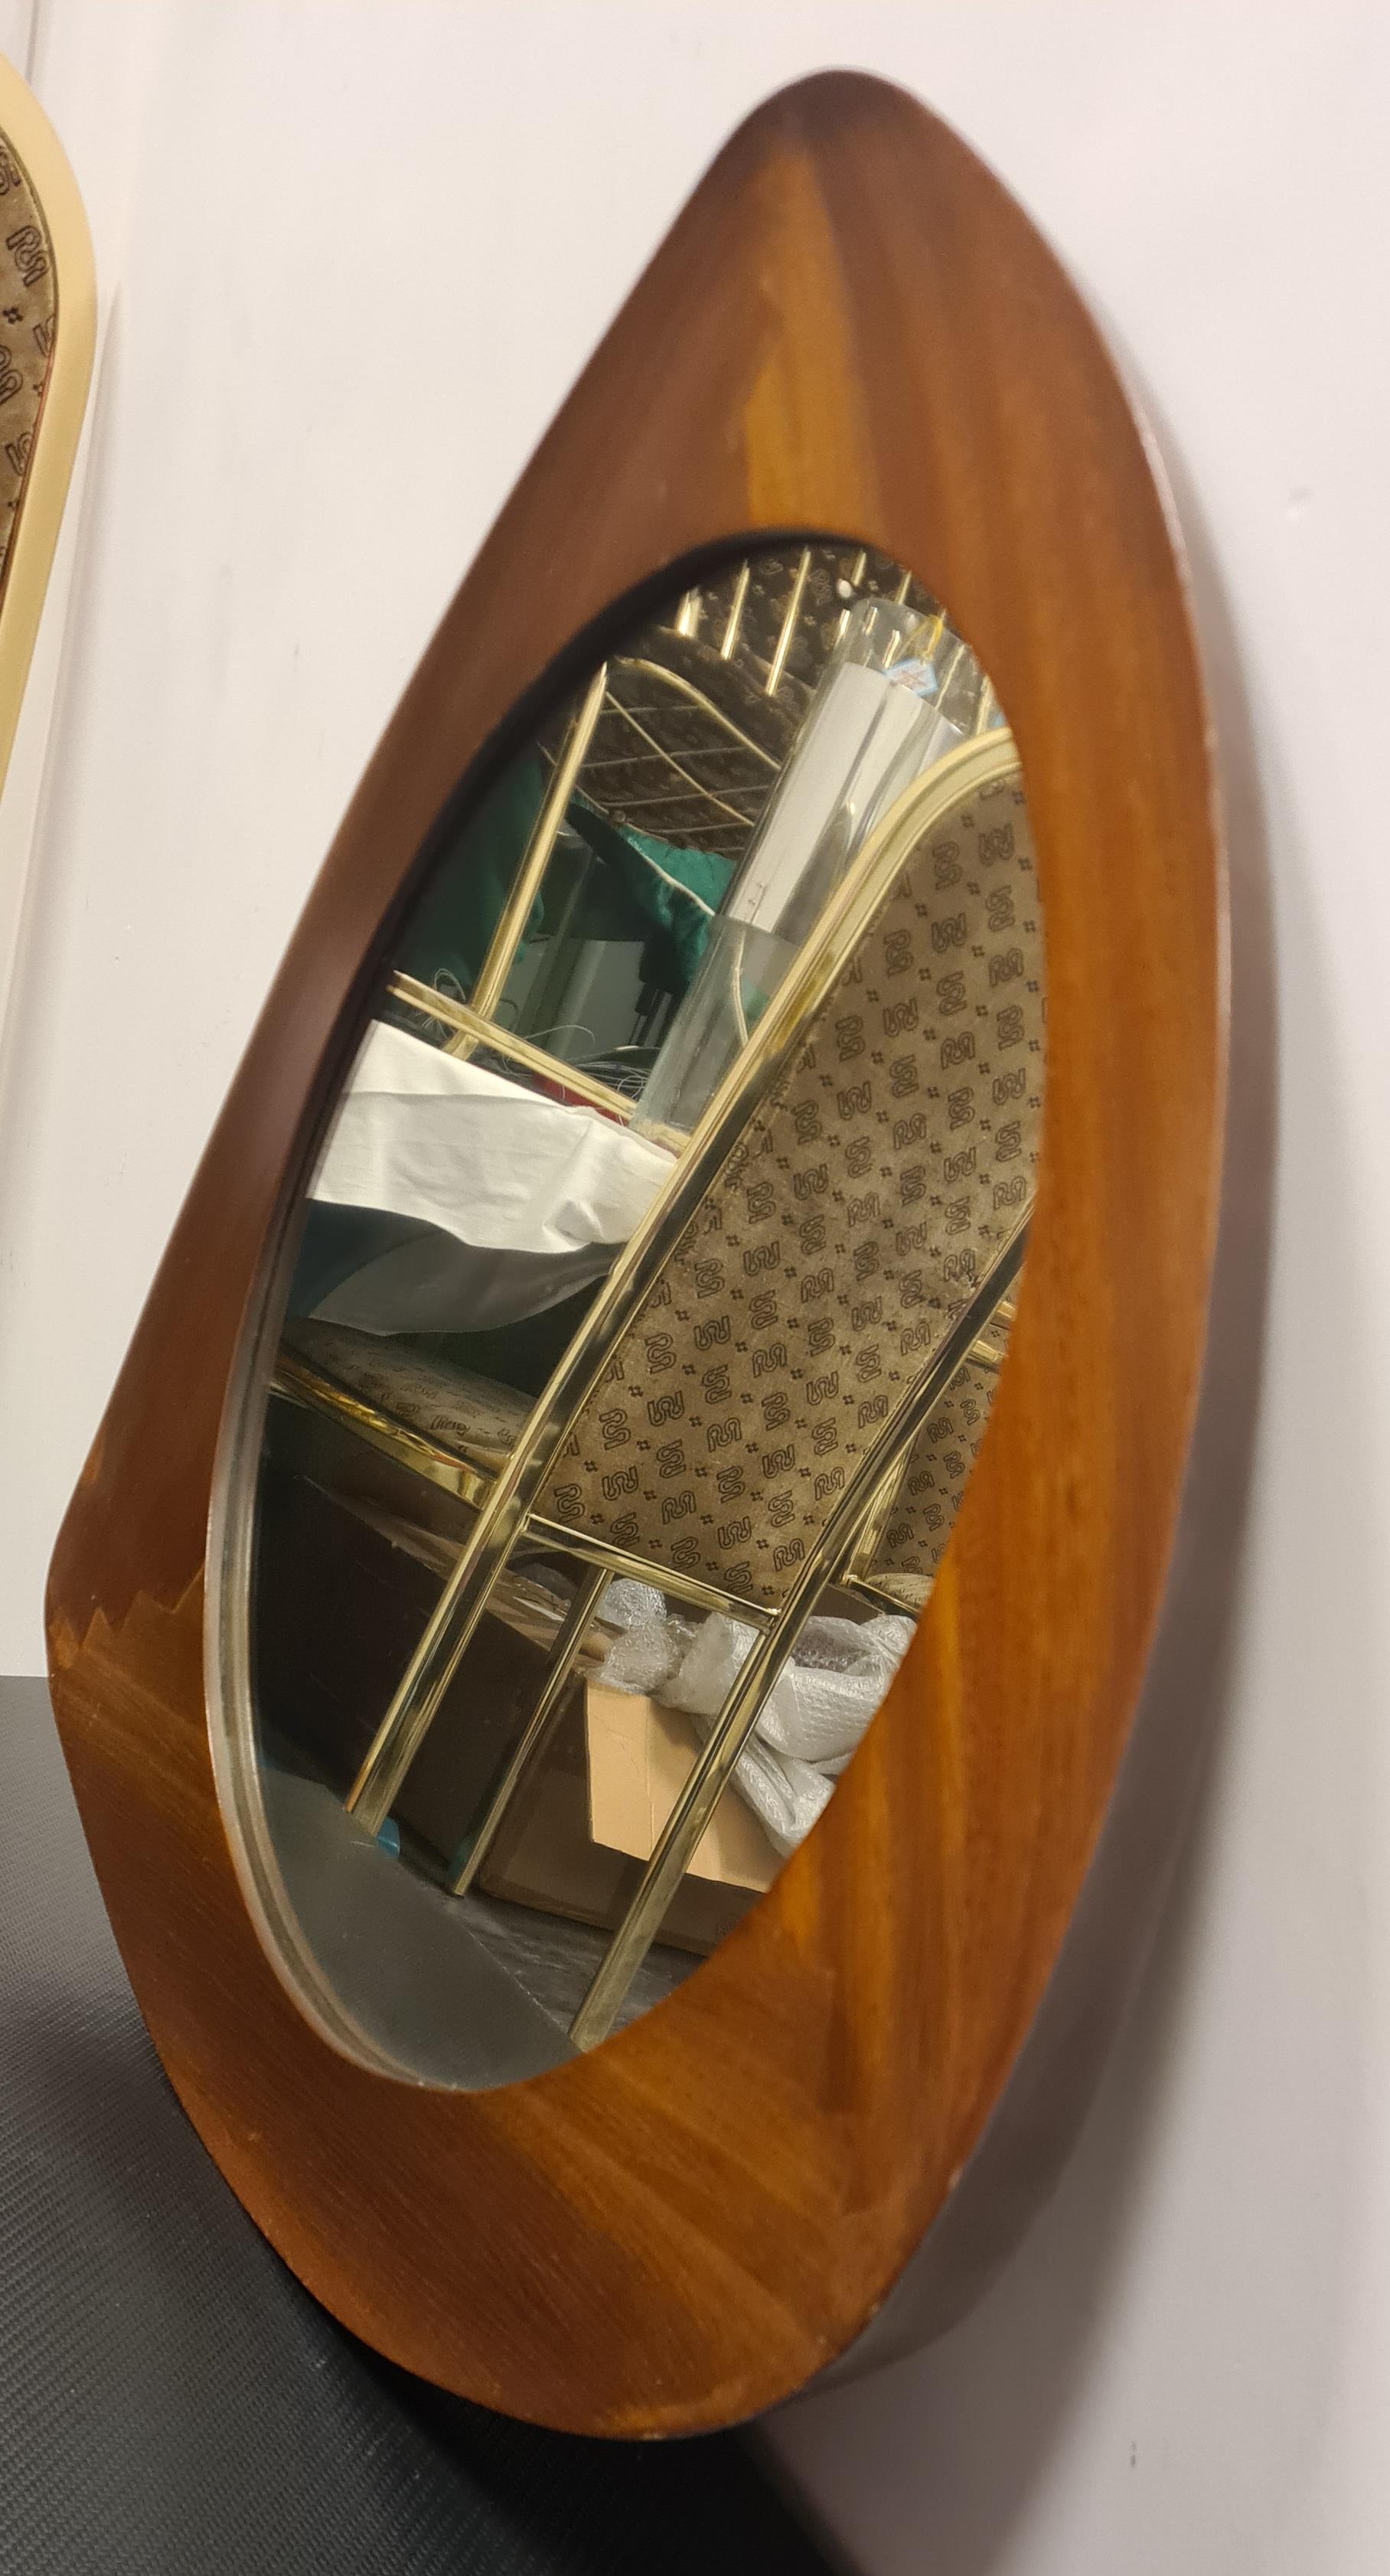 Oscar model mirror by Campo & Graffi for Home 1958 For Sale 2